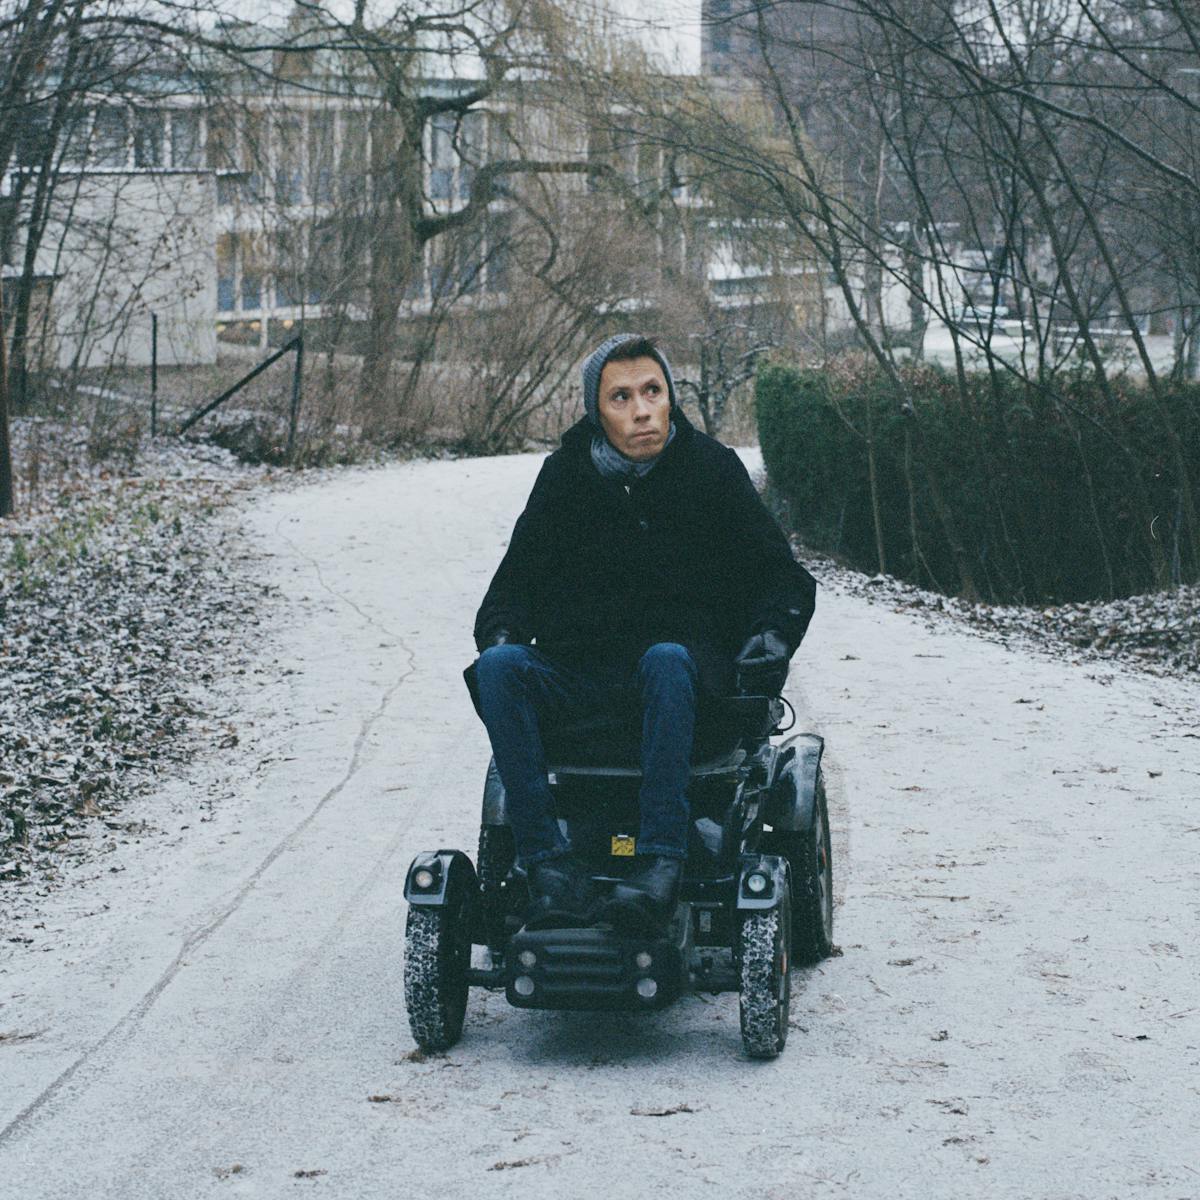 Photograph of a man using an off-road electric wheelchair. He is wearing jeans, a dark coat and a grey wooly hat and scarf. He is pictured driving along a snowy path, winding though winter woodland. Behind him in the distance are buildings. He is looking off to the right as he drives towards the camera.